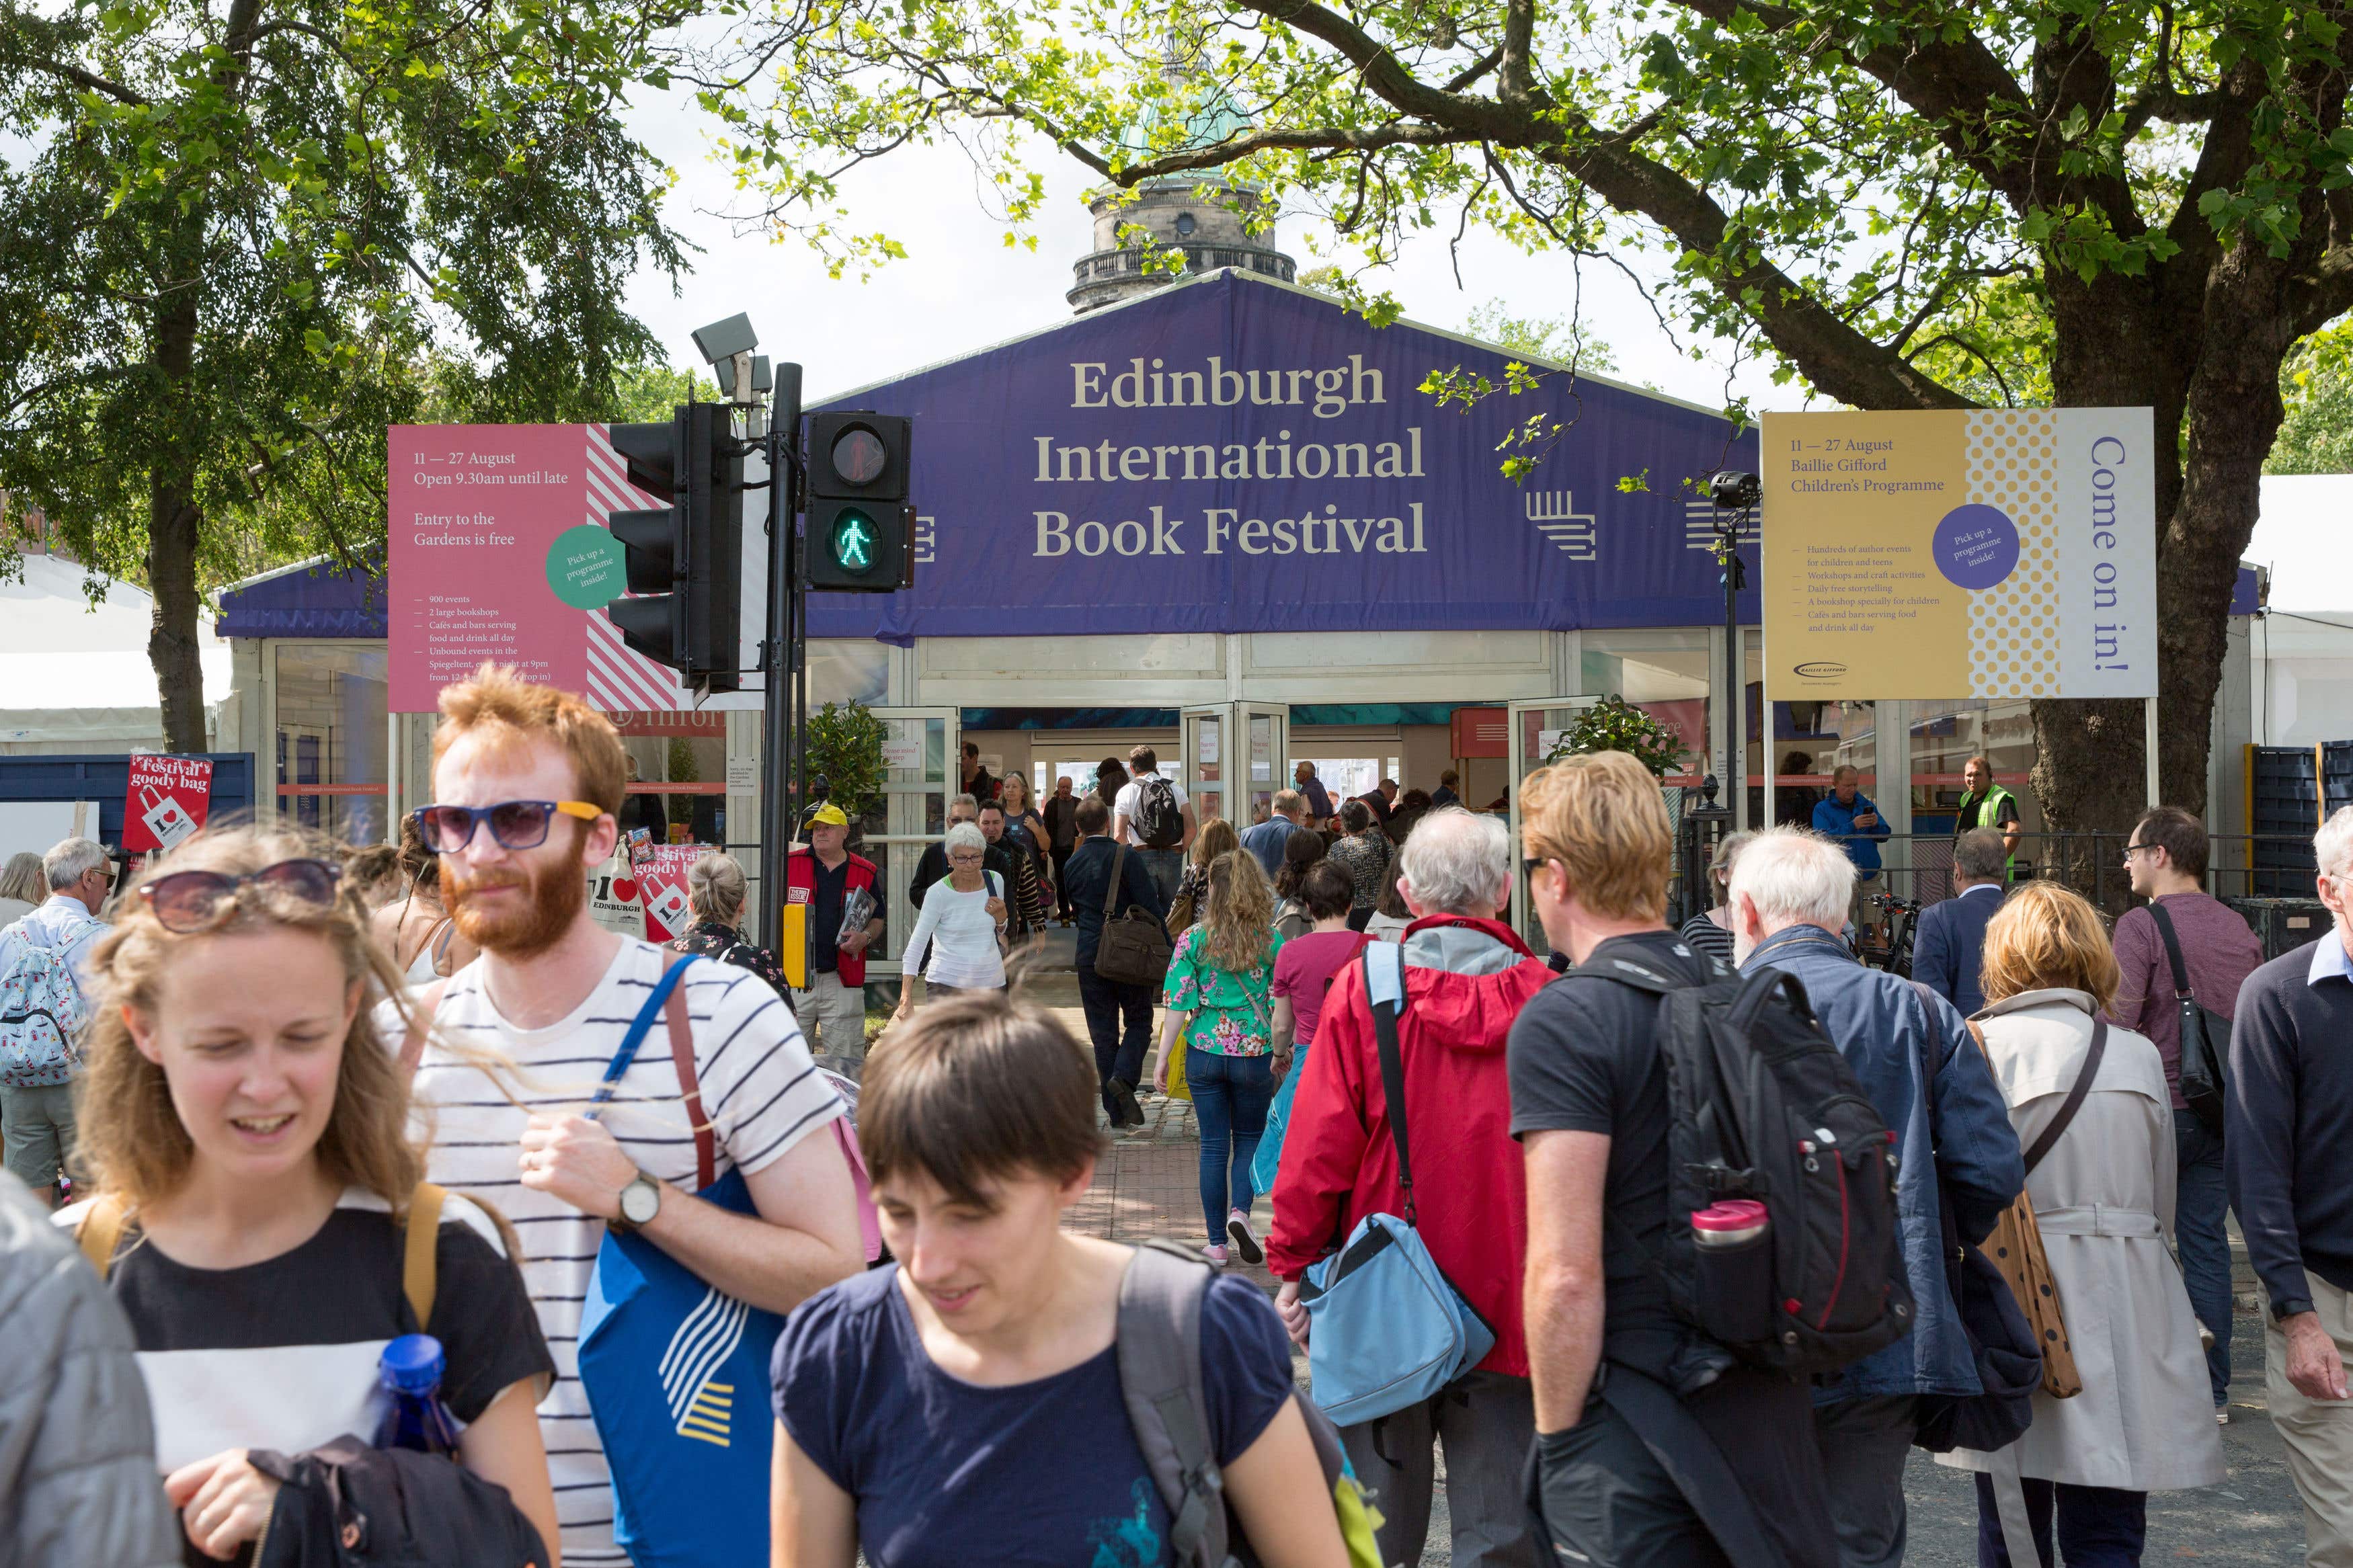 Authors walk out of Edinburgh book festival event in protest at fossil